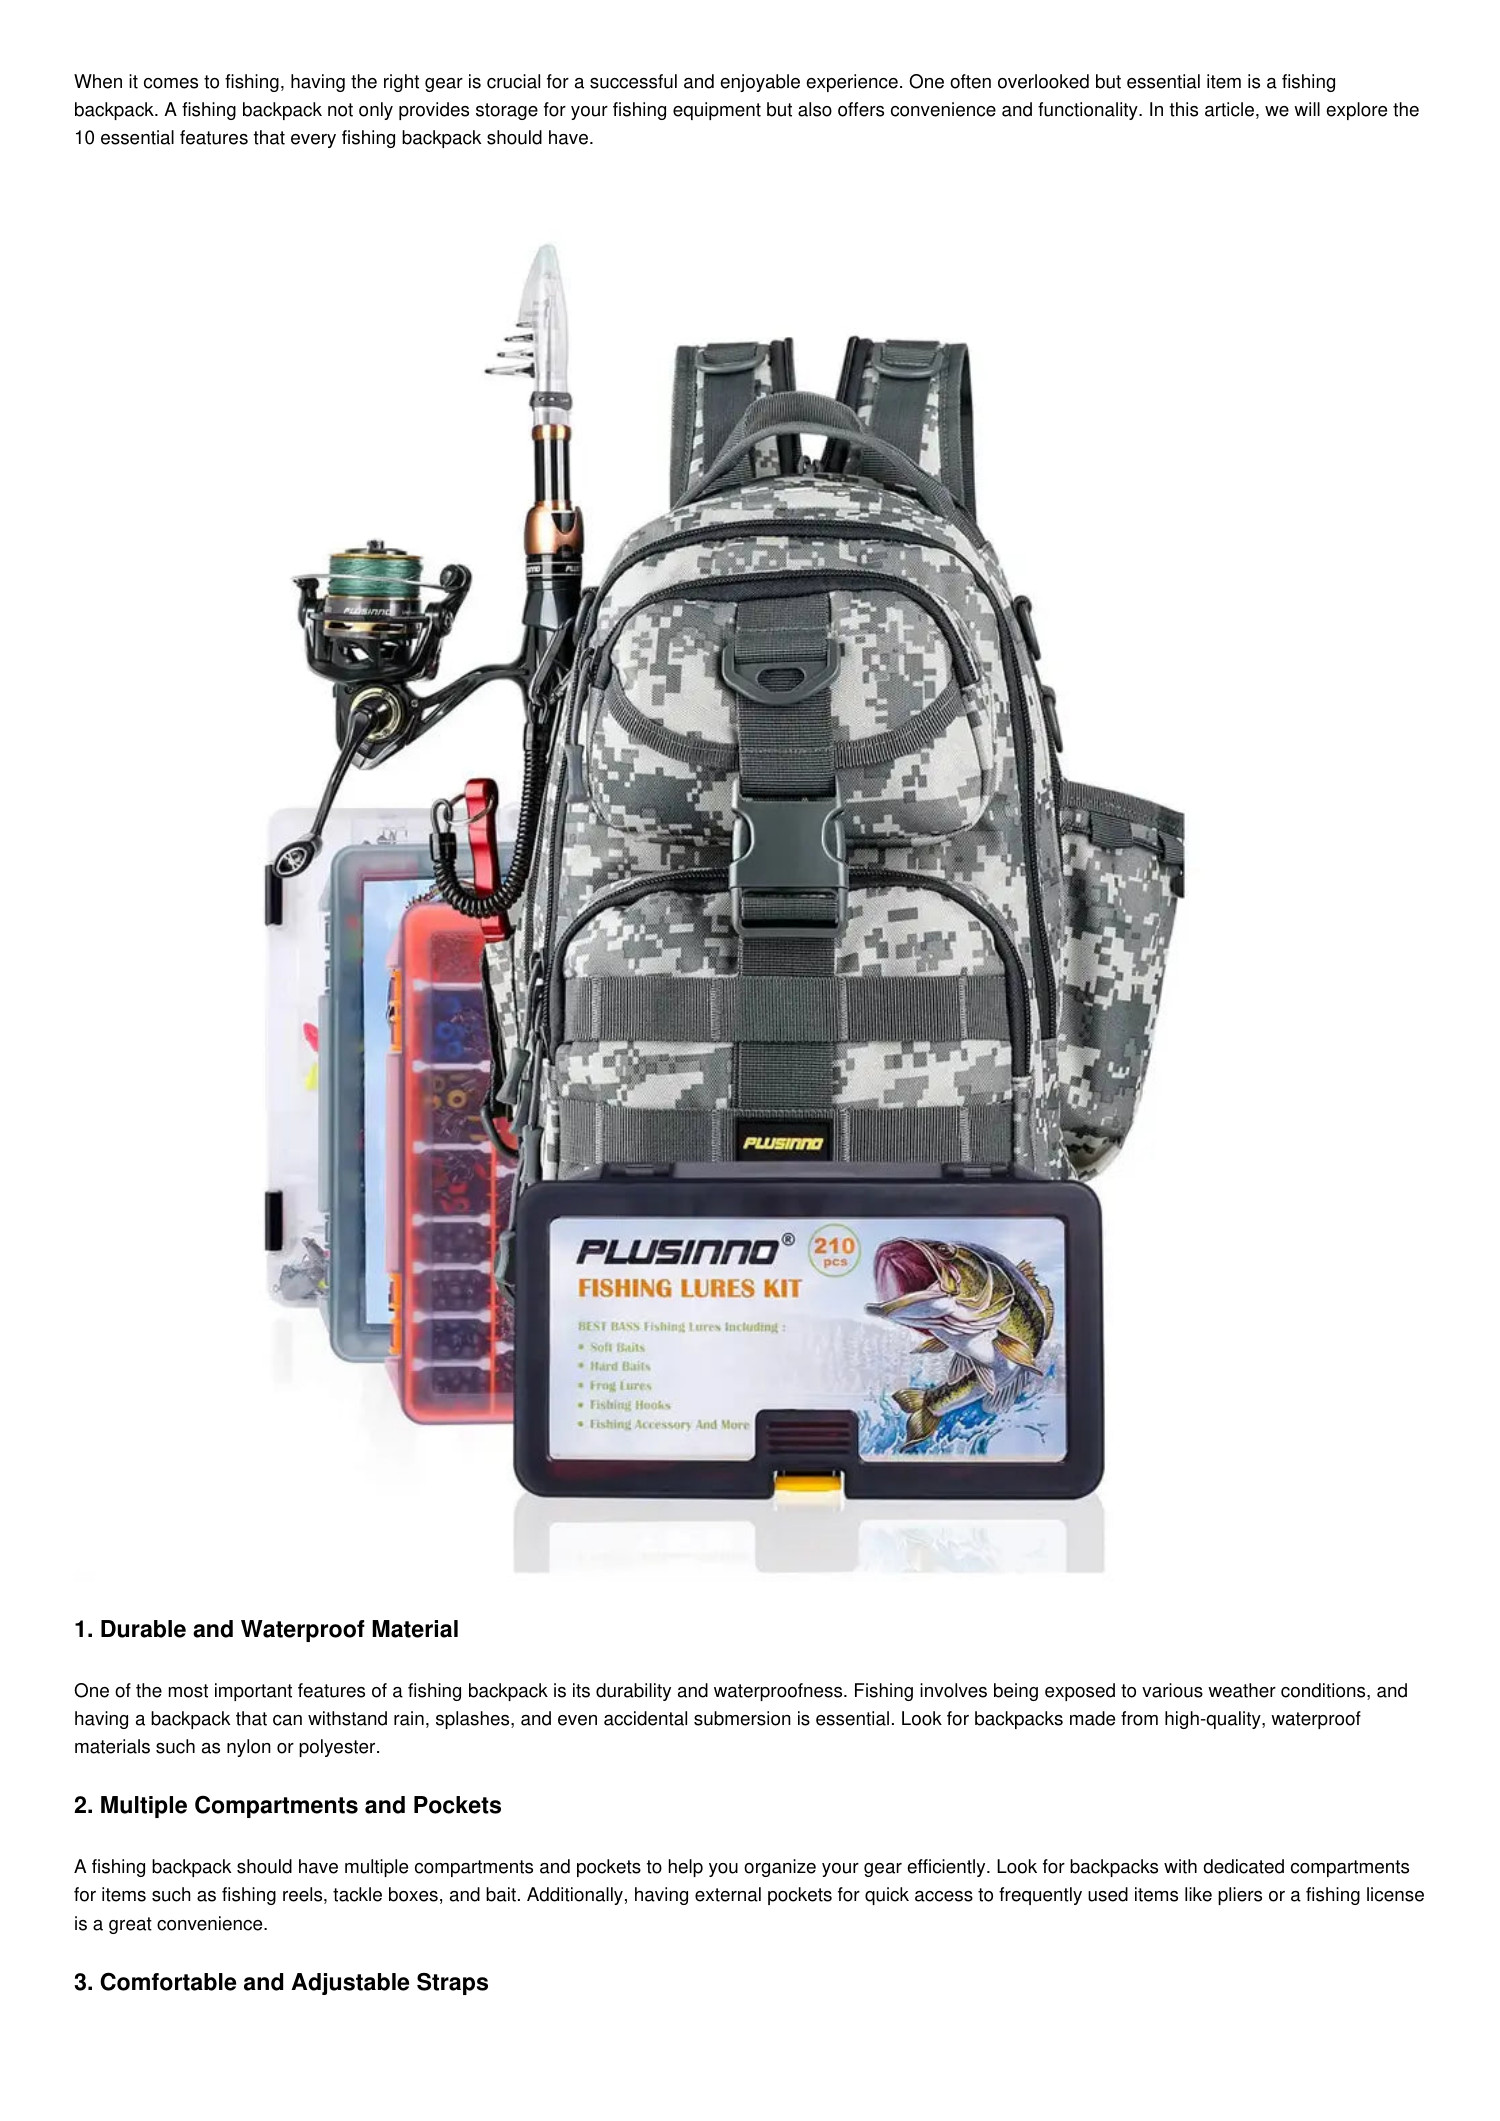 https://www.docdroid.net/file/view/McQW477/10-essential-features-every-fishing-backpack-should-have-pdf.jpg